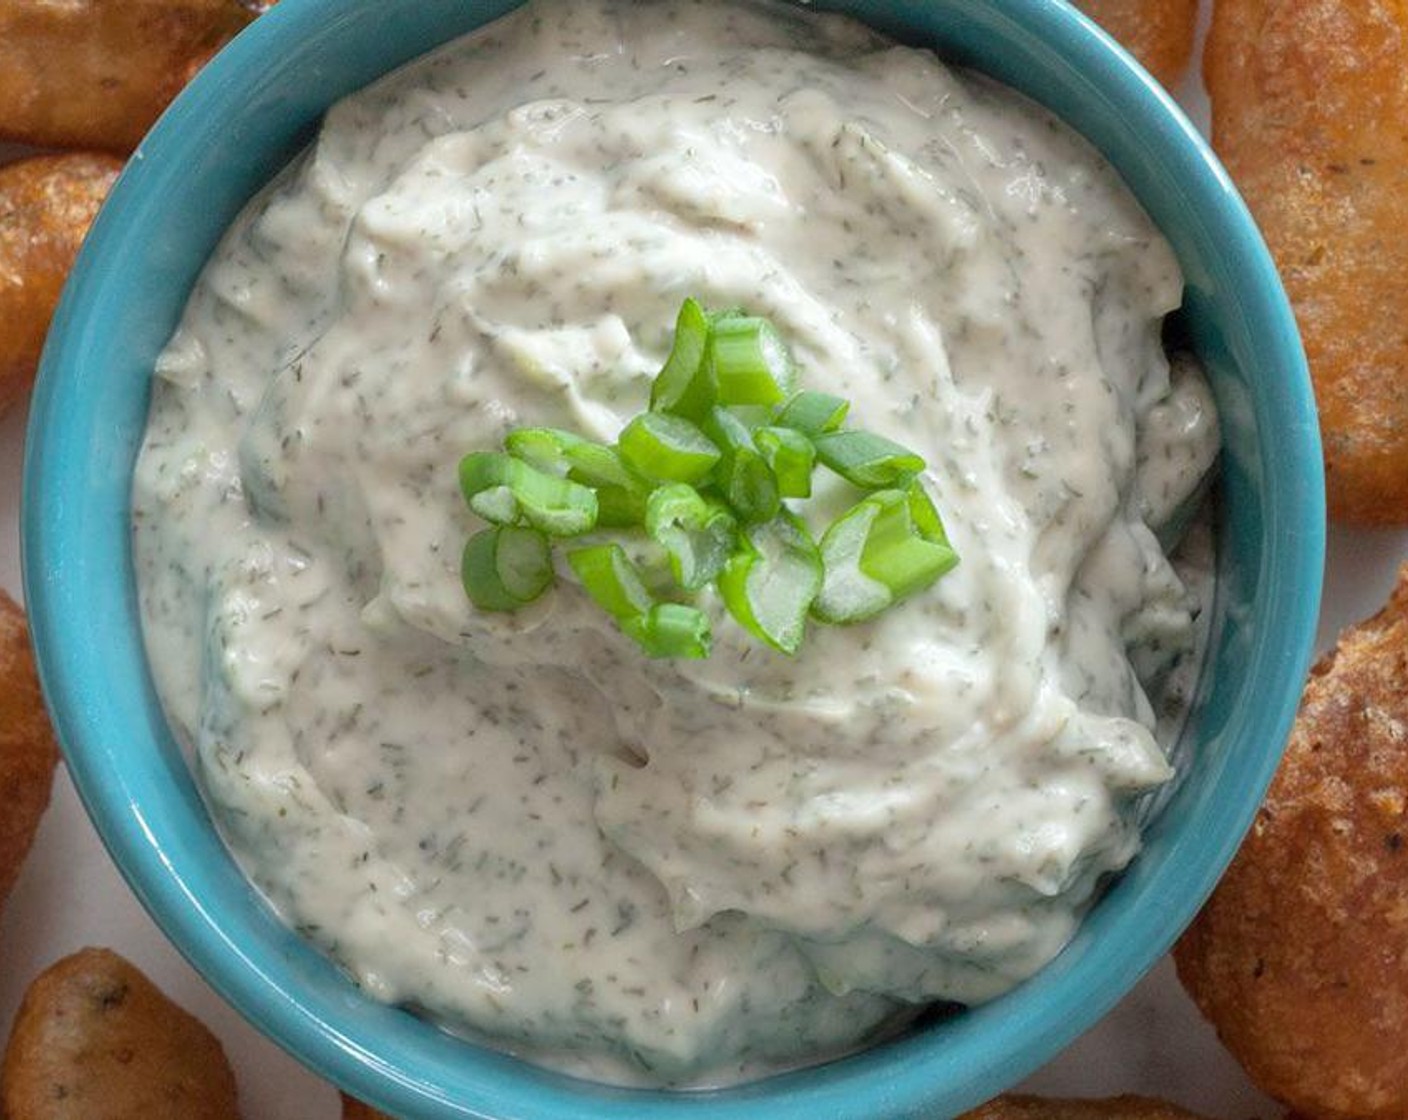 step 1 Place Vegan Mayonnaise (1 cup), juice from Lemon (1), Dried Dill Weed (1 Tbsp), McCormick® Garlic Powder (1/2 tsp), Sea Salt (1/4 tsp), Ground Black Pepper (1/4 tsp), and Scallion (1 bunch) in a small bowl and whisk to combine.